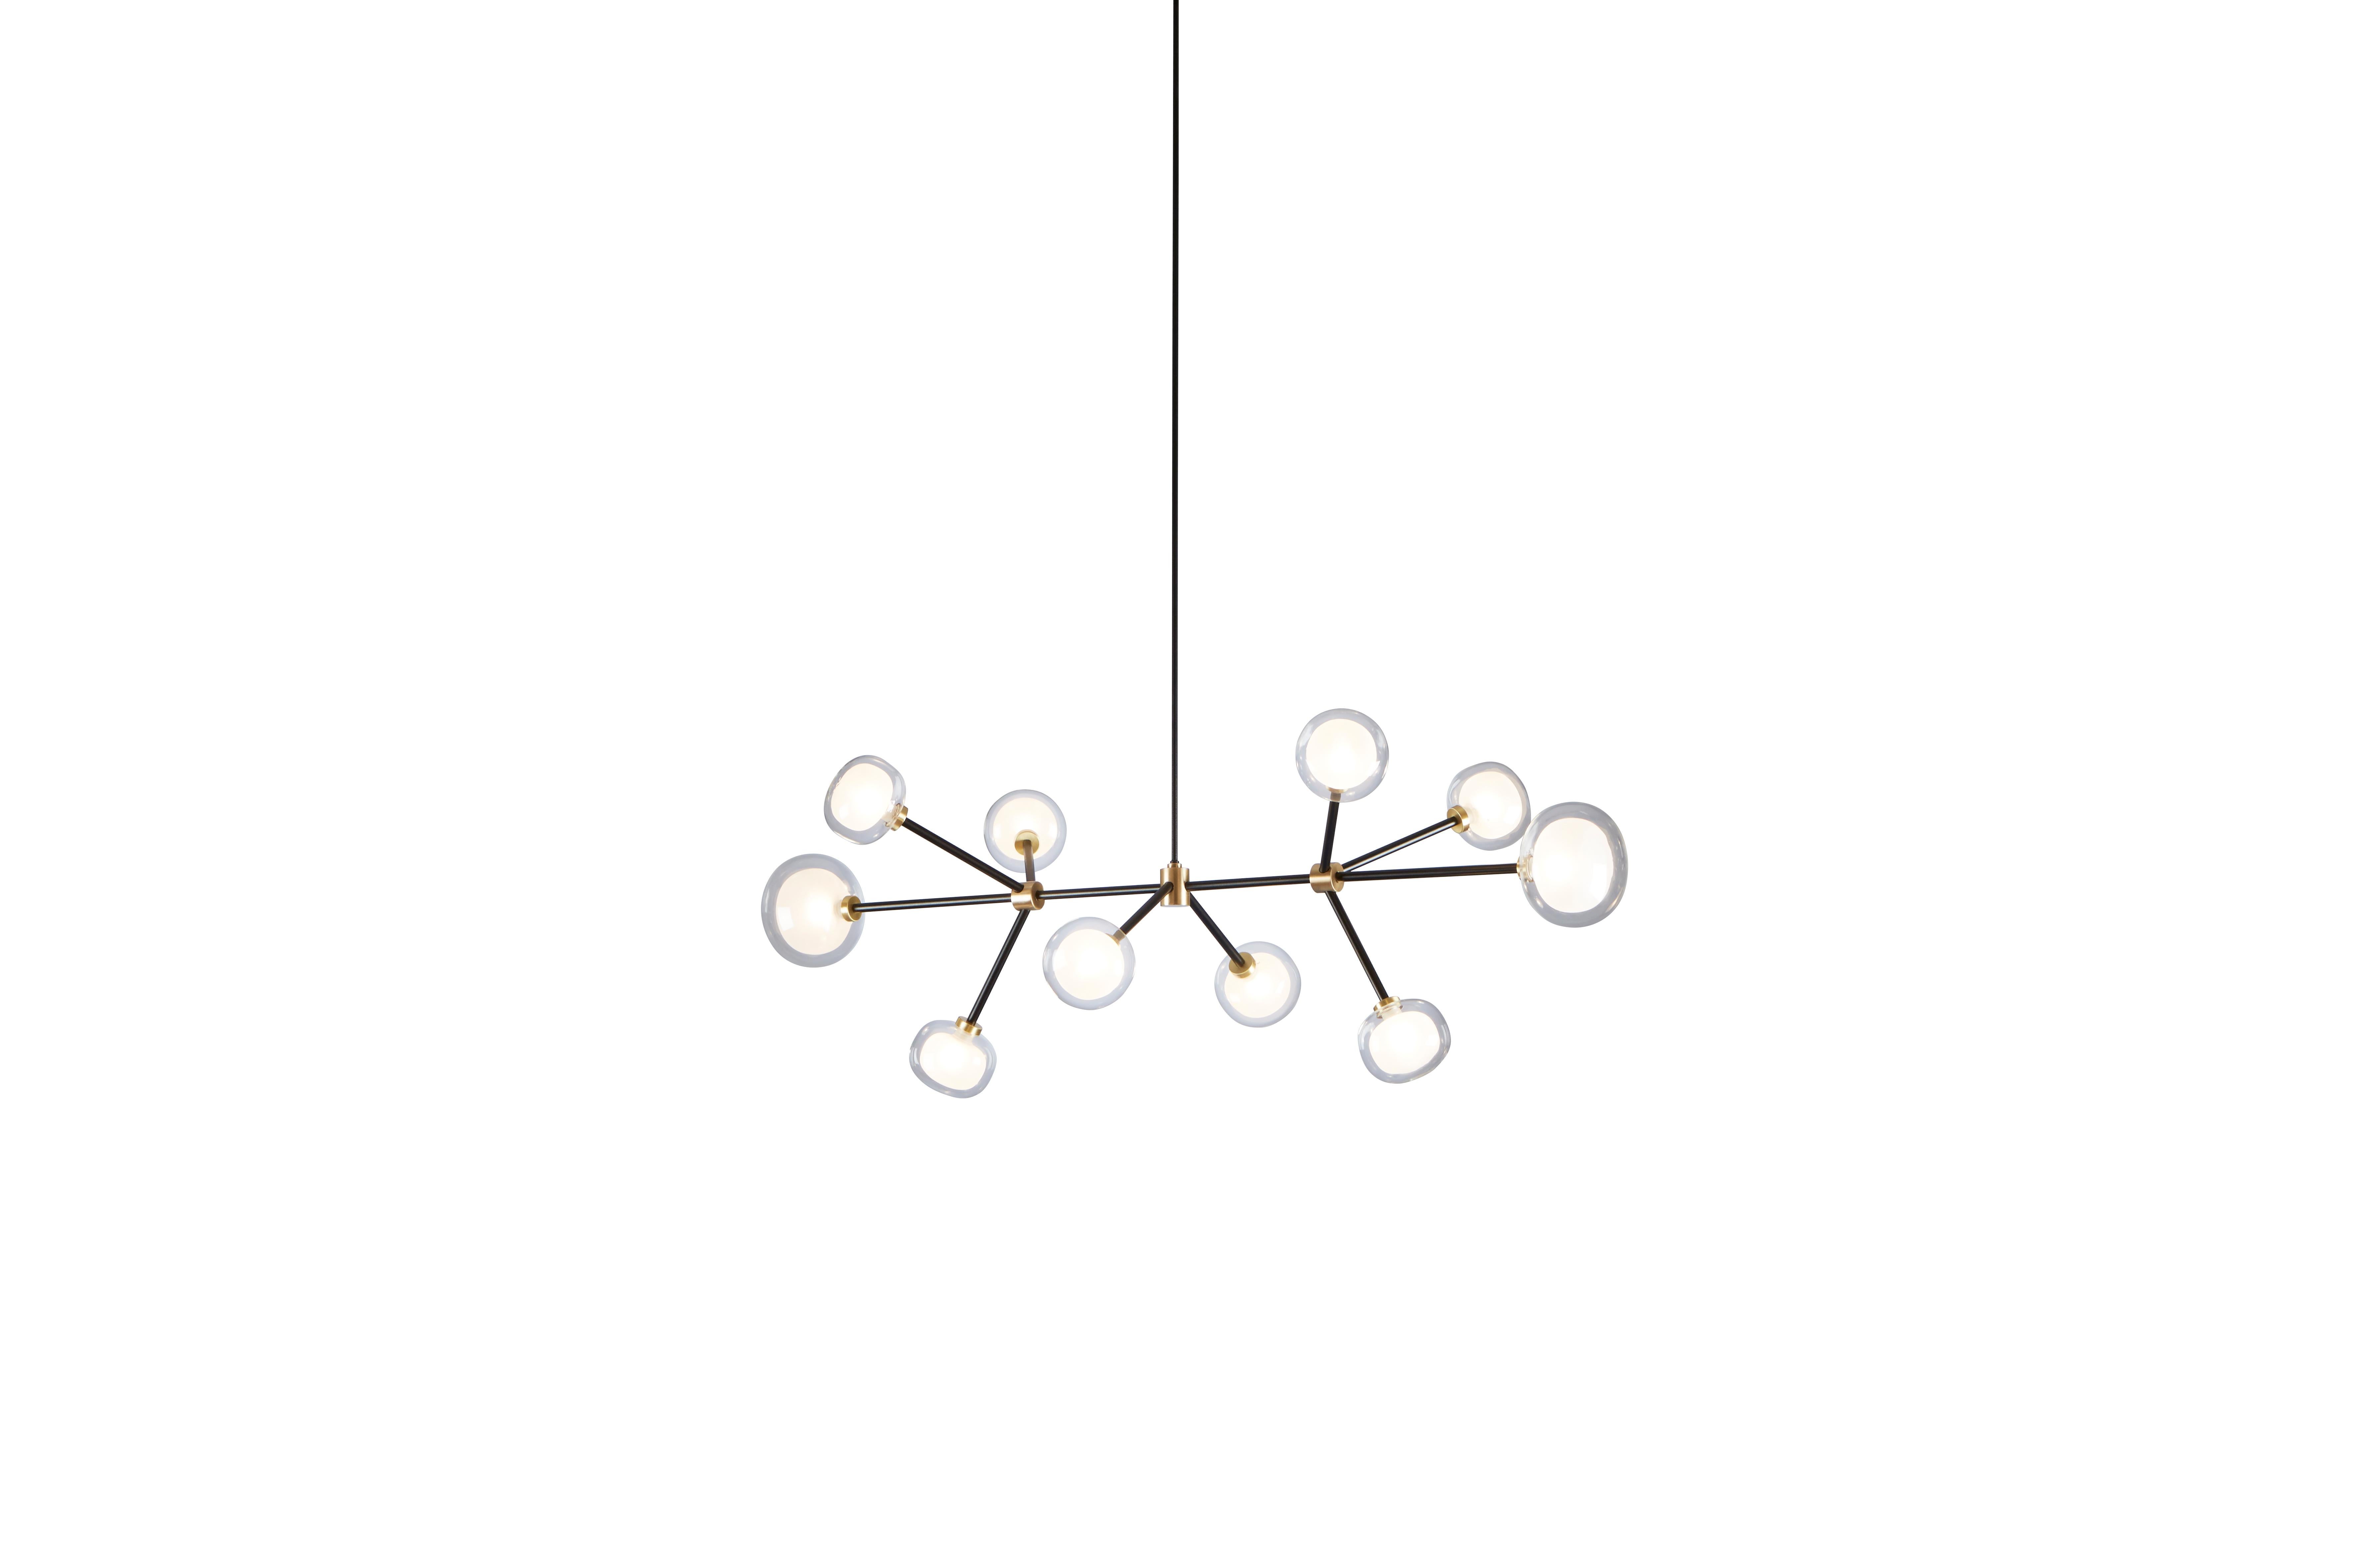 Chandelier Nabila 552.10 by Corrado Dotti x TOOY
10 lights
UL Listed Compliant with US electric system 

Model shown: C2 + C48 + smoke
Finish: Brushed brass
Color: Smoke glass
Canopy: Ø 13 cm

Lighting source : 10 x G9 220/240V

Pendant: Cable